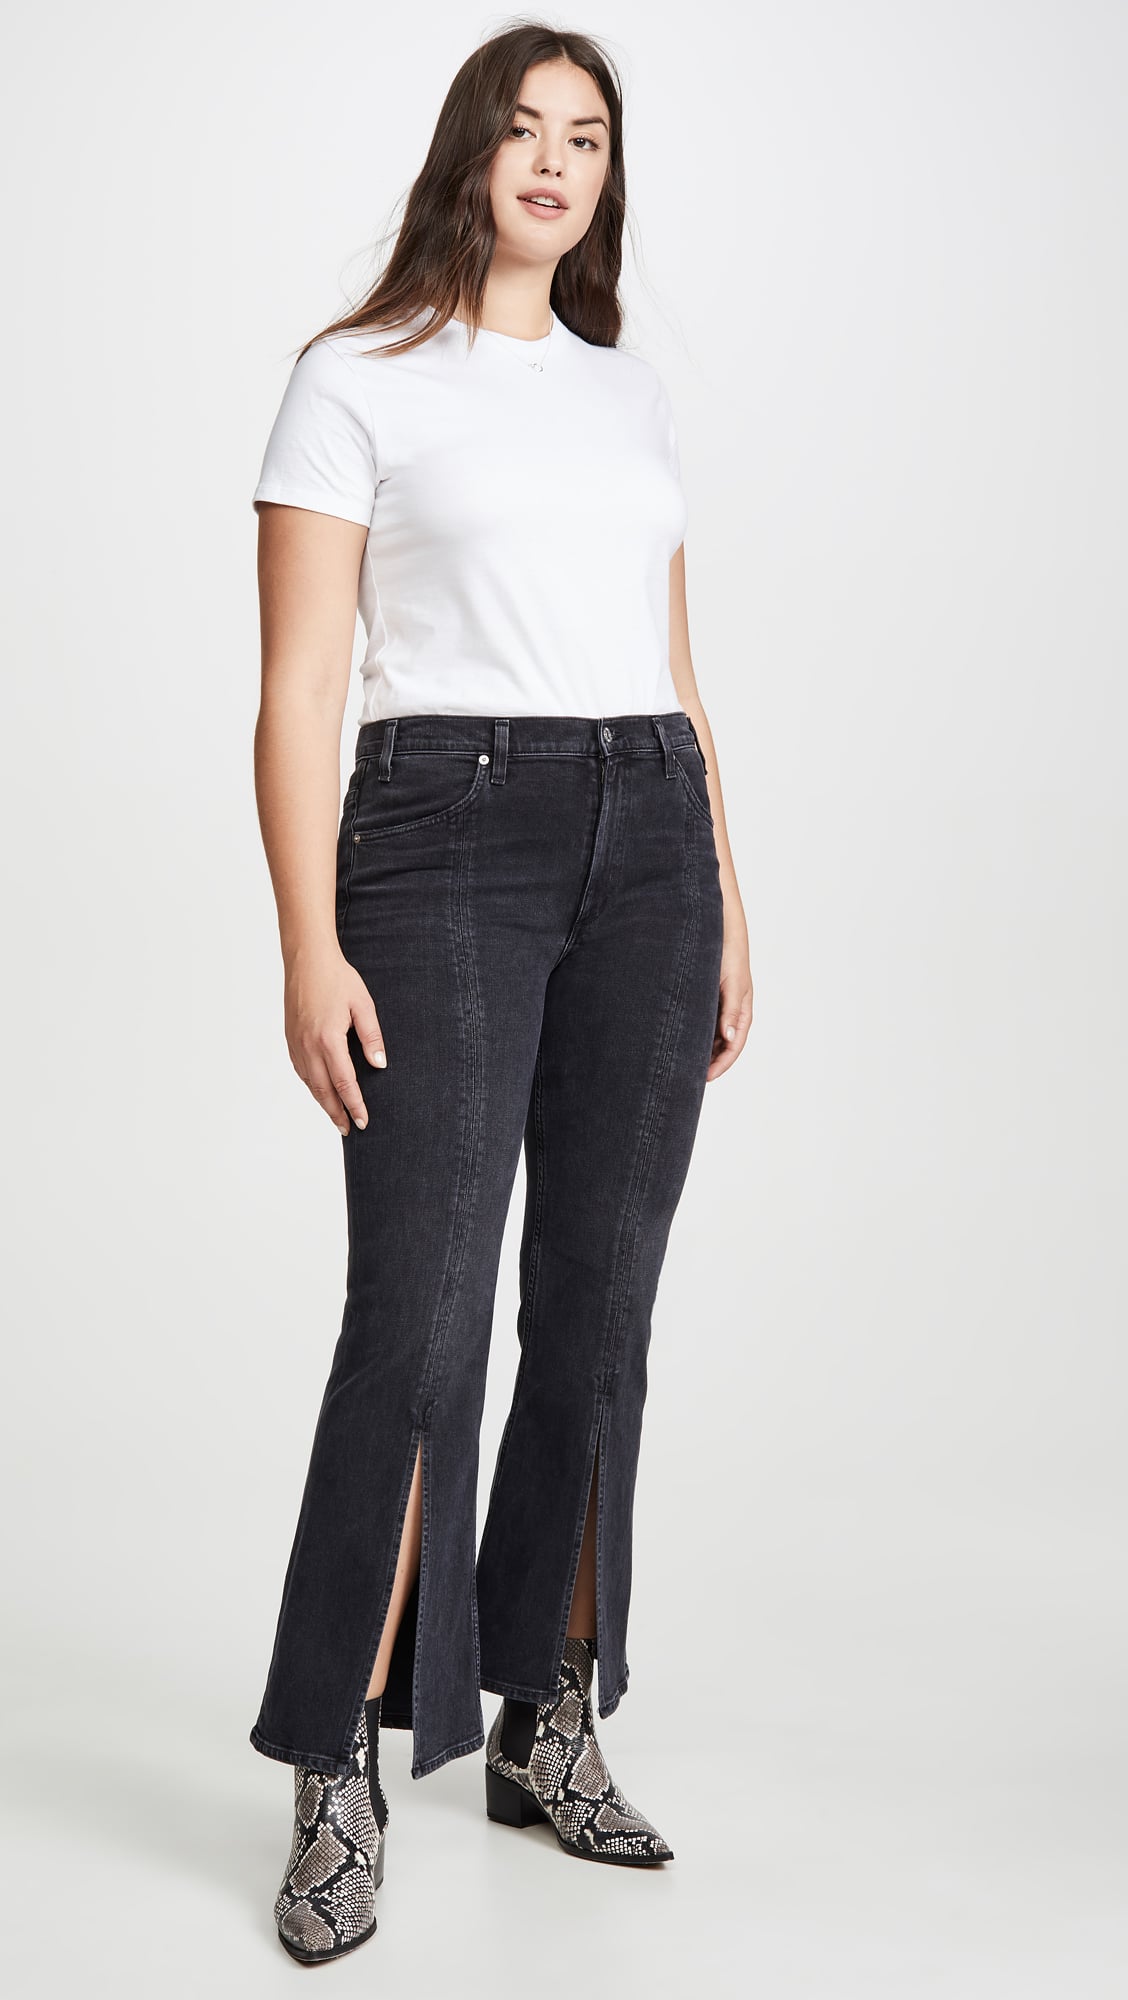 The Best Straight Leg and Crop Flare Jeans + Shopbop Sale - Straight A Style